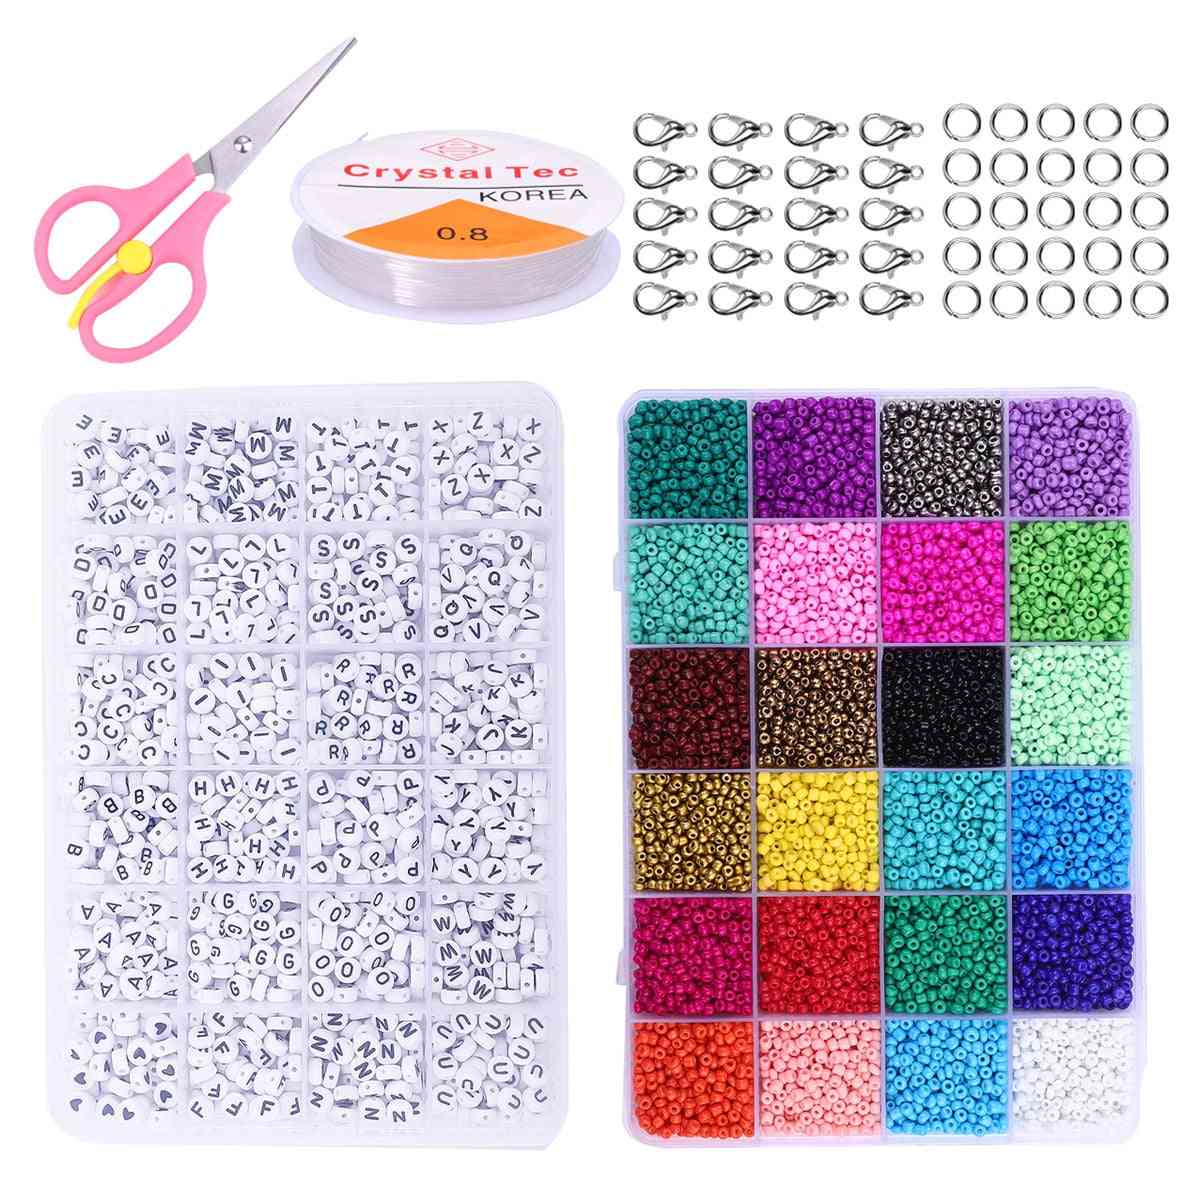 Jewelry Making Kit Czech Crystal Glass Seed Beads Alphabet Letter Bead Lobster Clasps Beading Cord Box Set